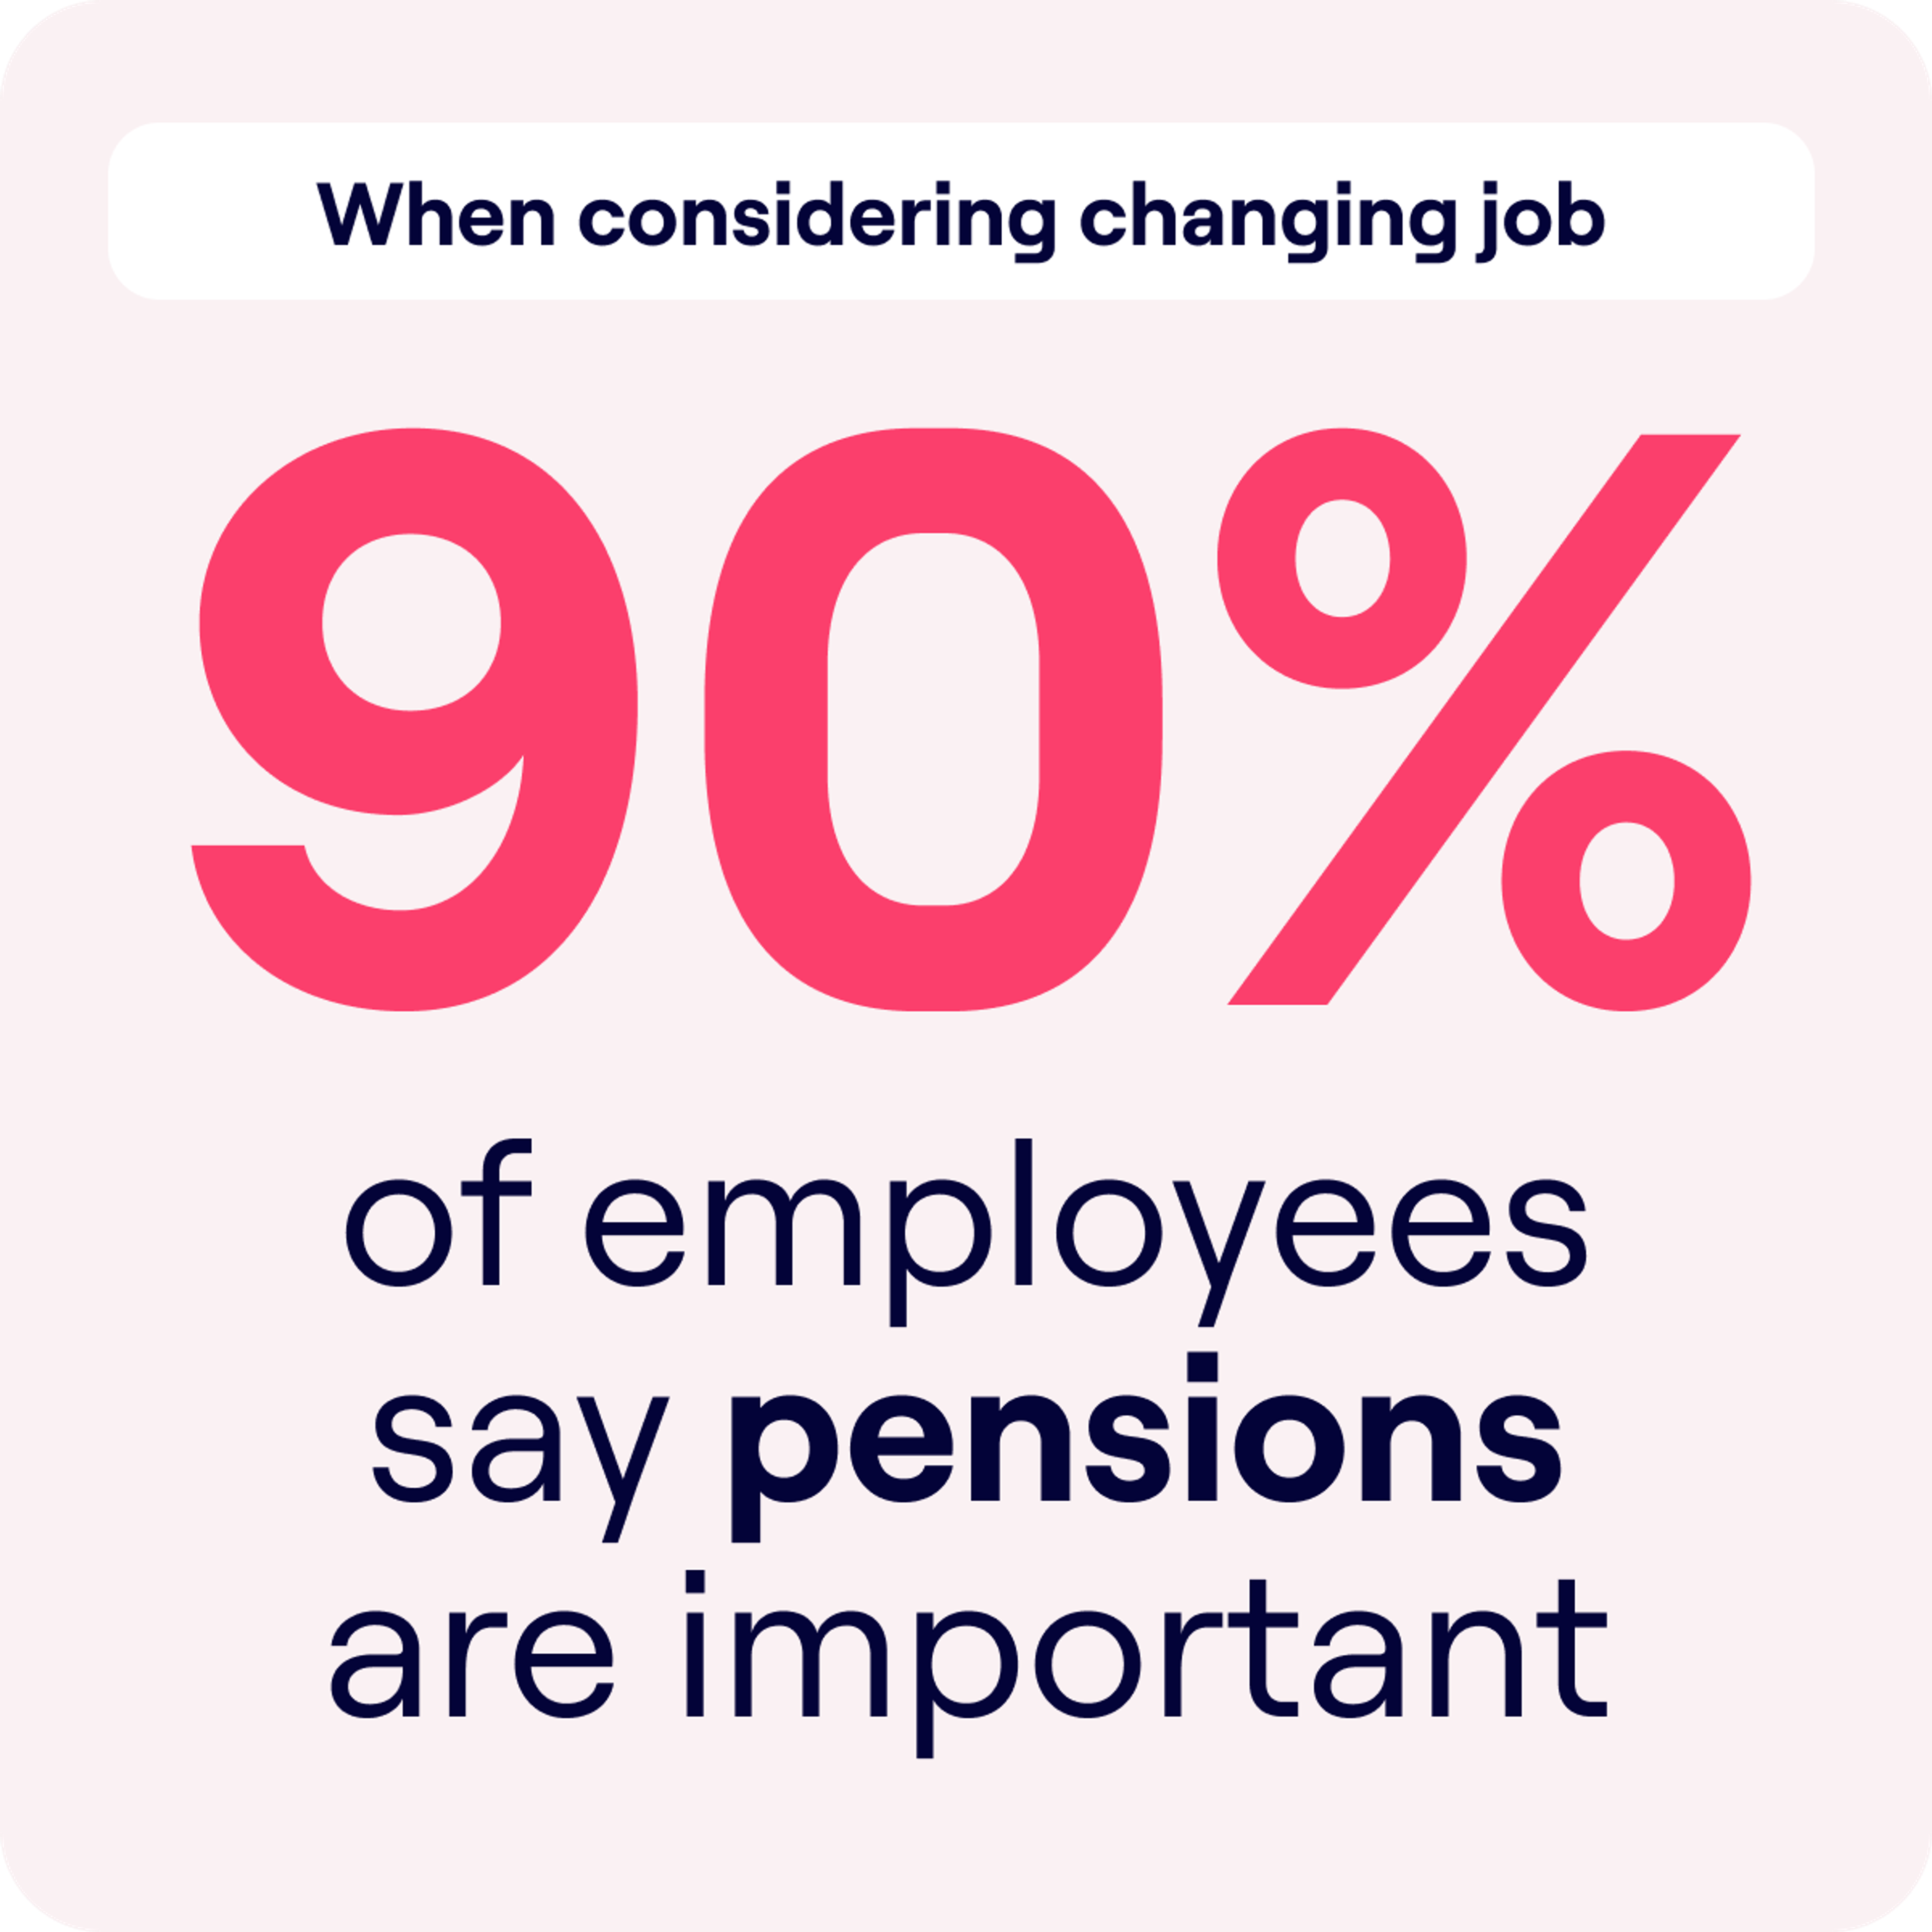 Graphic highlighting that "90% of employees say pensions are important" when considering changing jobs. The number 90% is in large, pink font, making it the focal point of the message, emphasizing the high value employees place on pension benefits.